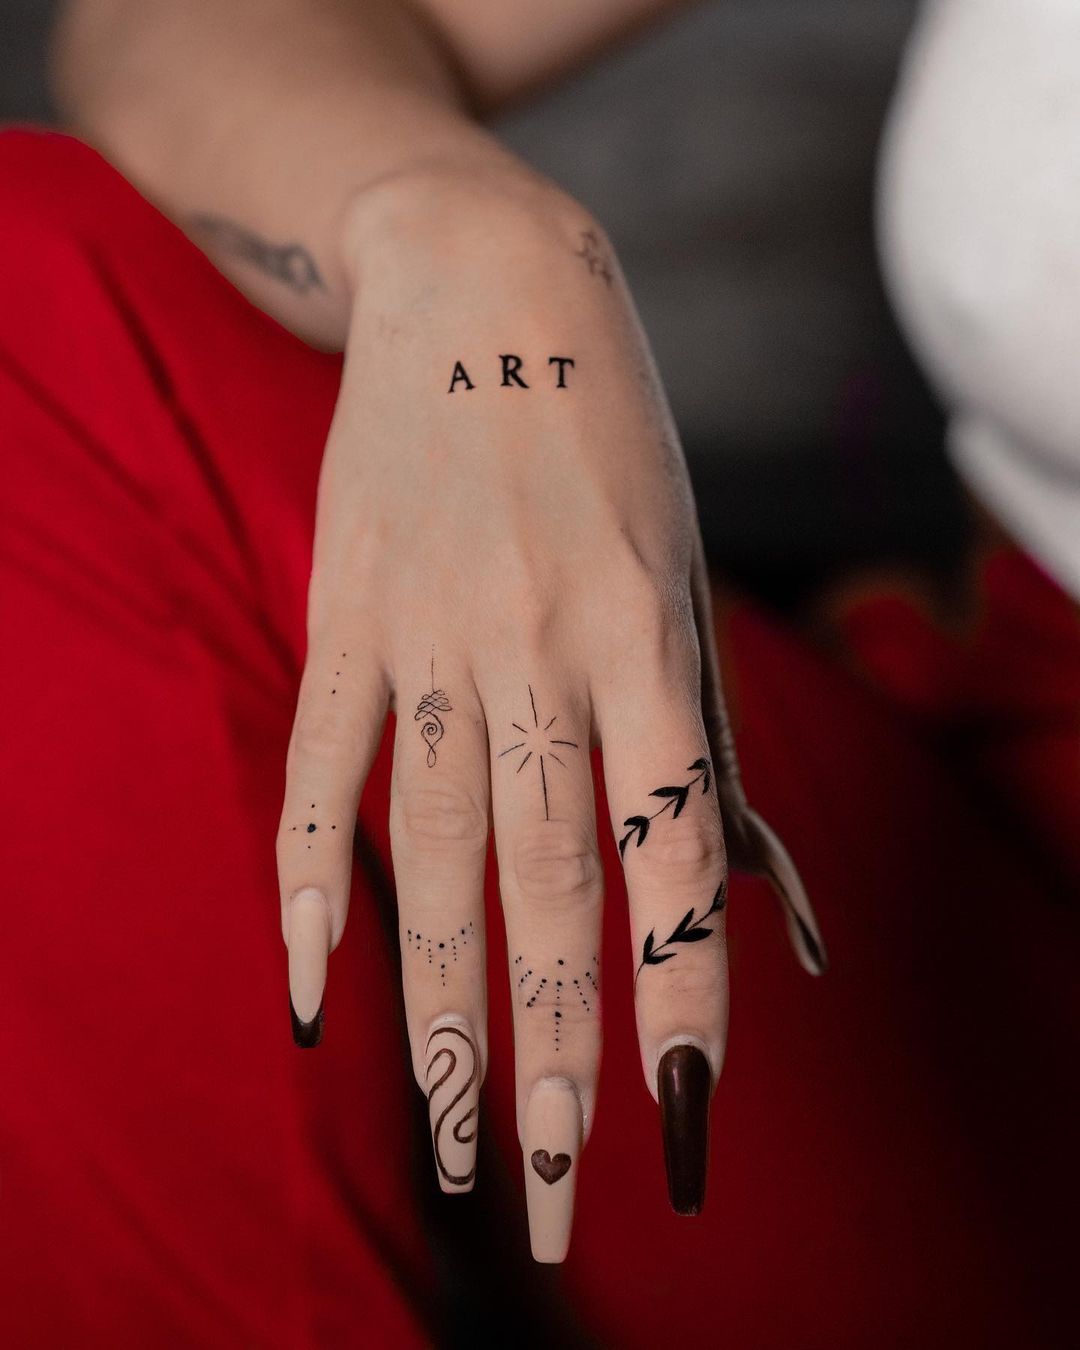 54 Great Finger Tattoo Ideas You Will Instantly Love - Hairstylery